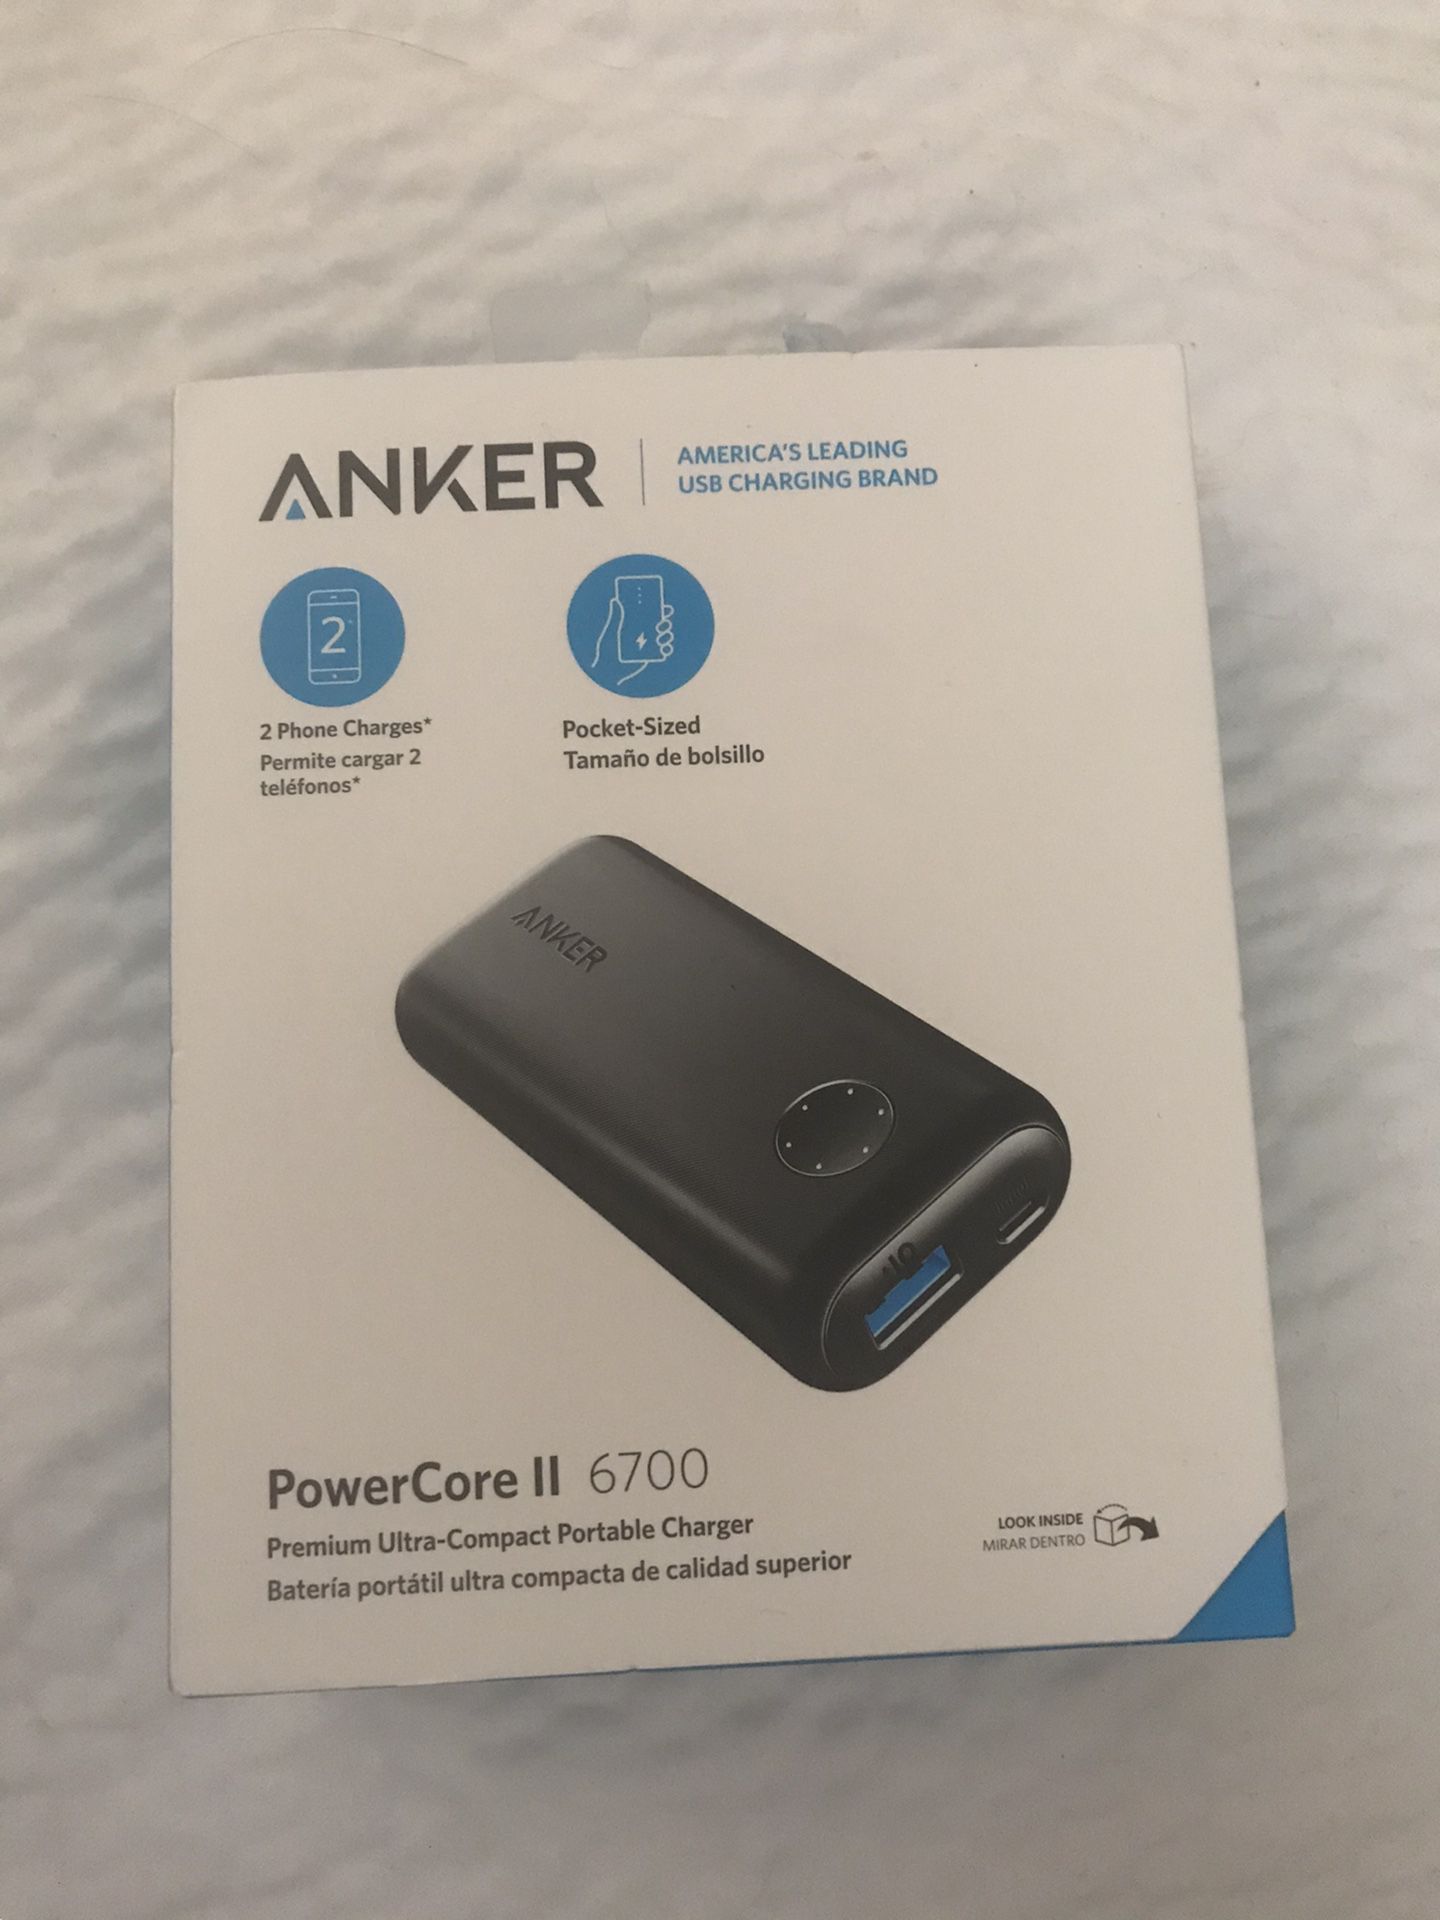 Portable Phone Charger - Anker PowerCore II